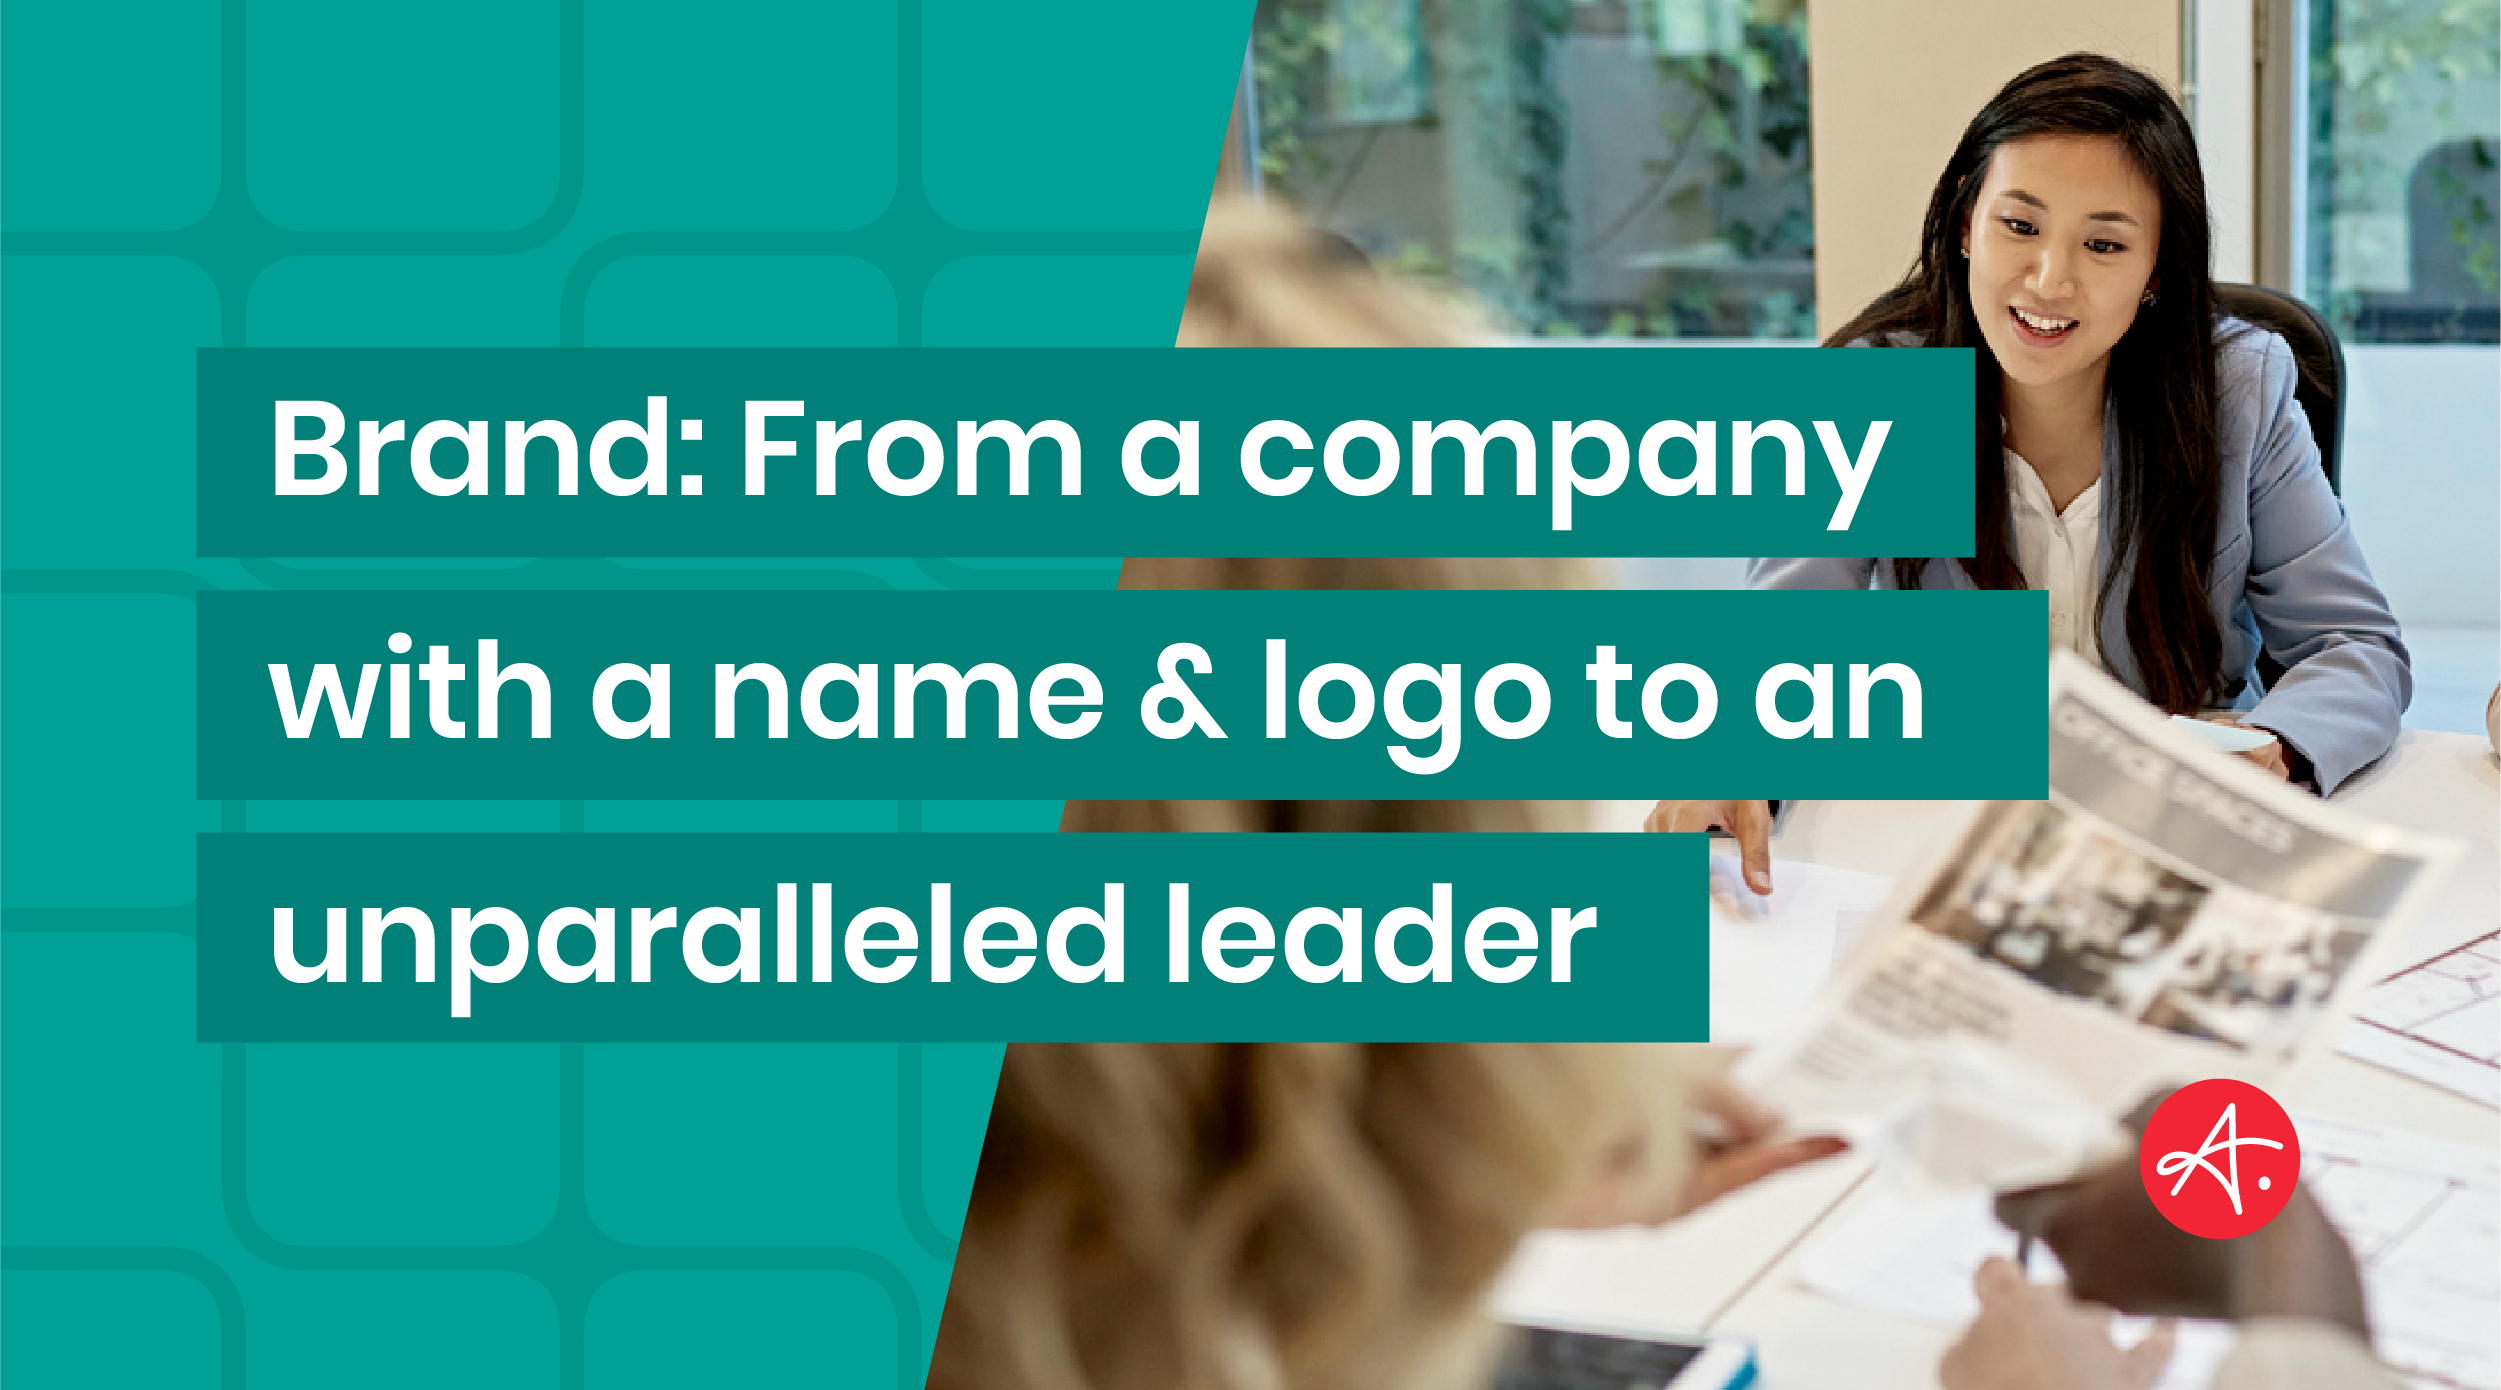 Brand: From a company with a name & logo to an unparalleled leader